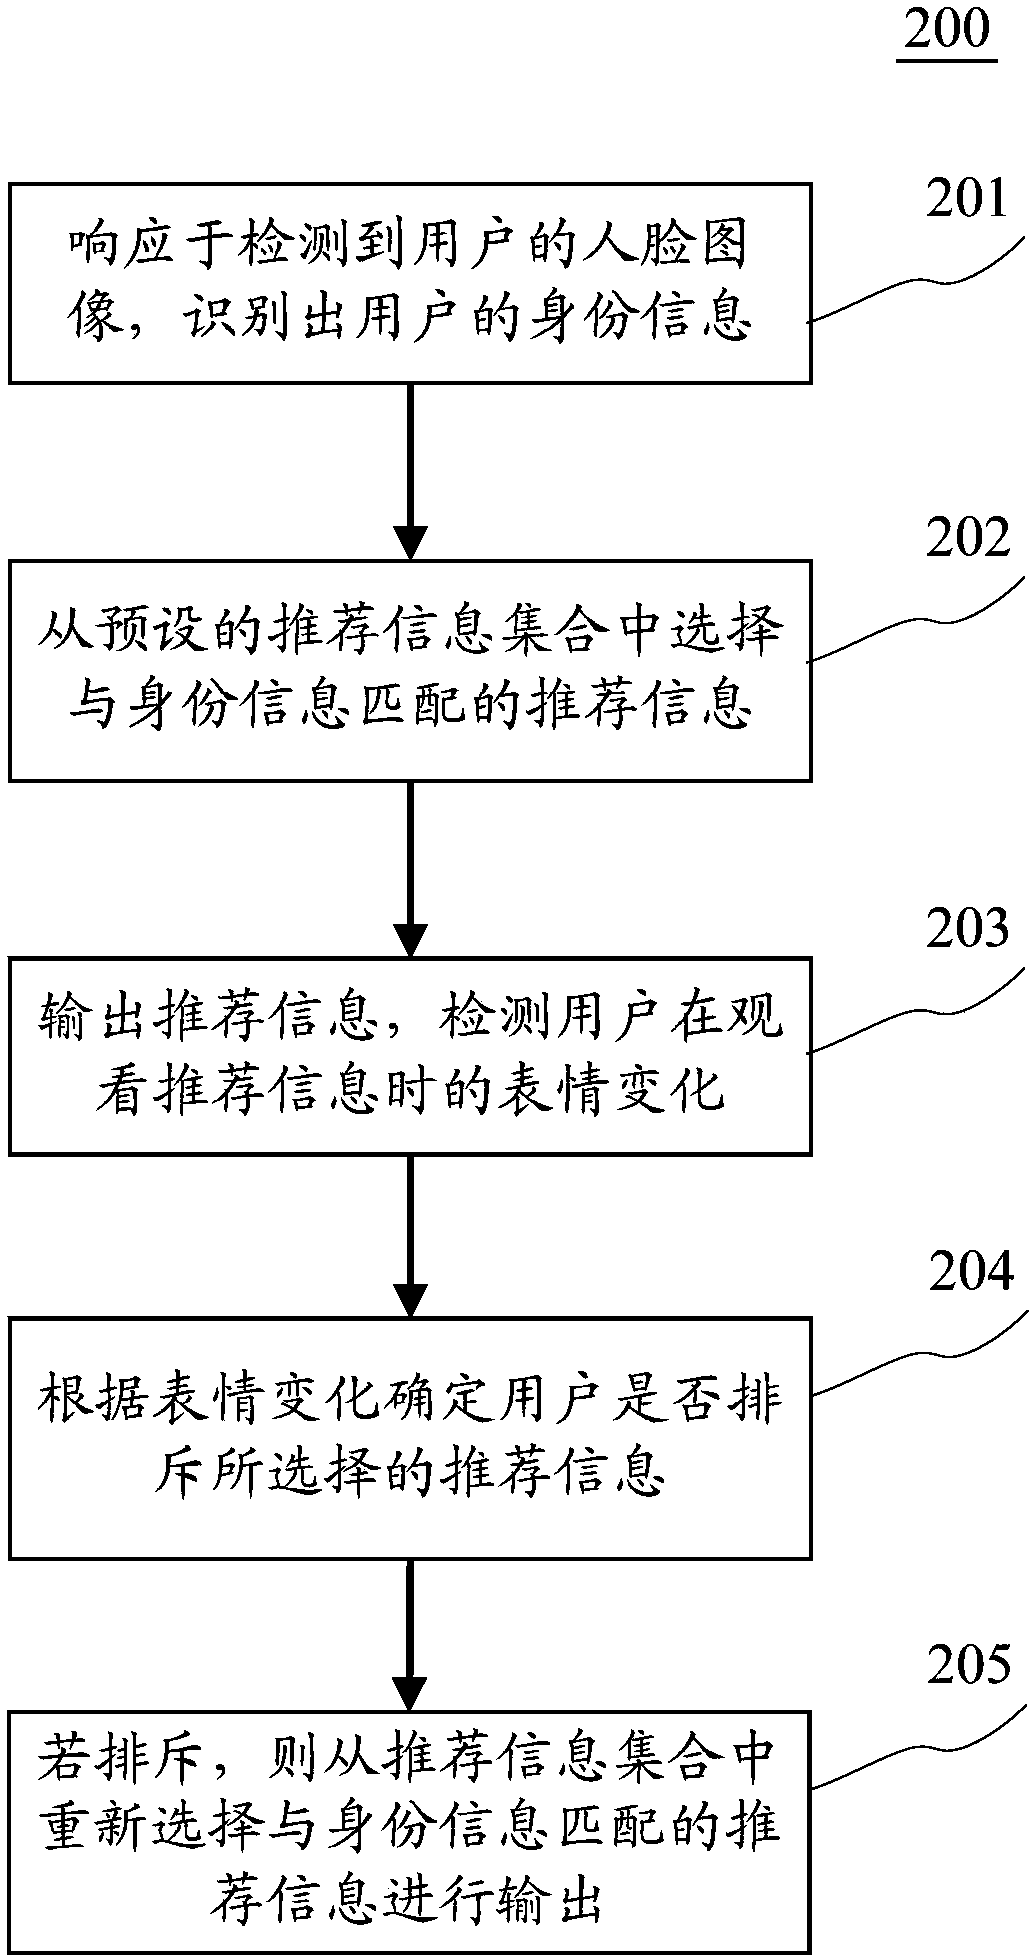 Method and device for outputting information